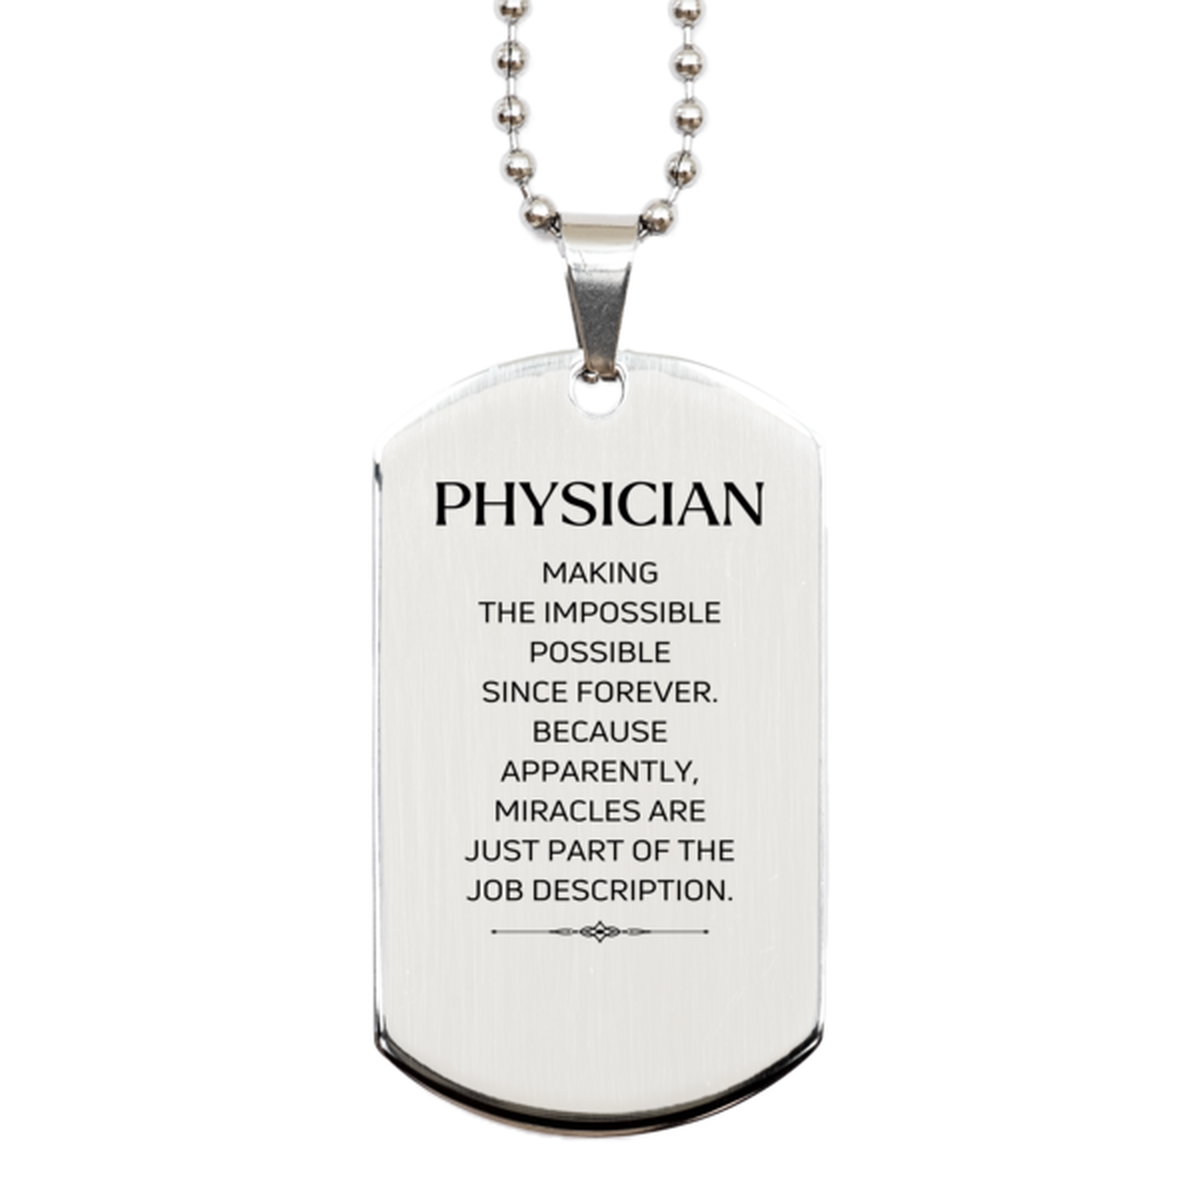 Funny Physician Gifts, Miracles are just part of the job description, Inspirational Birthday Silver Dog Tag For Physician, Men, Women, Coworkers, Friends, Boss